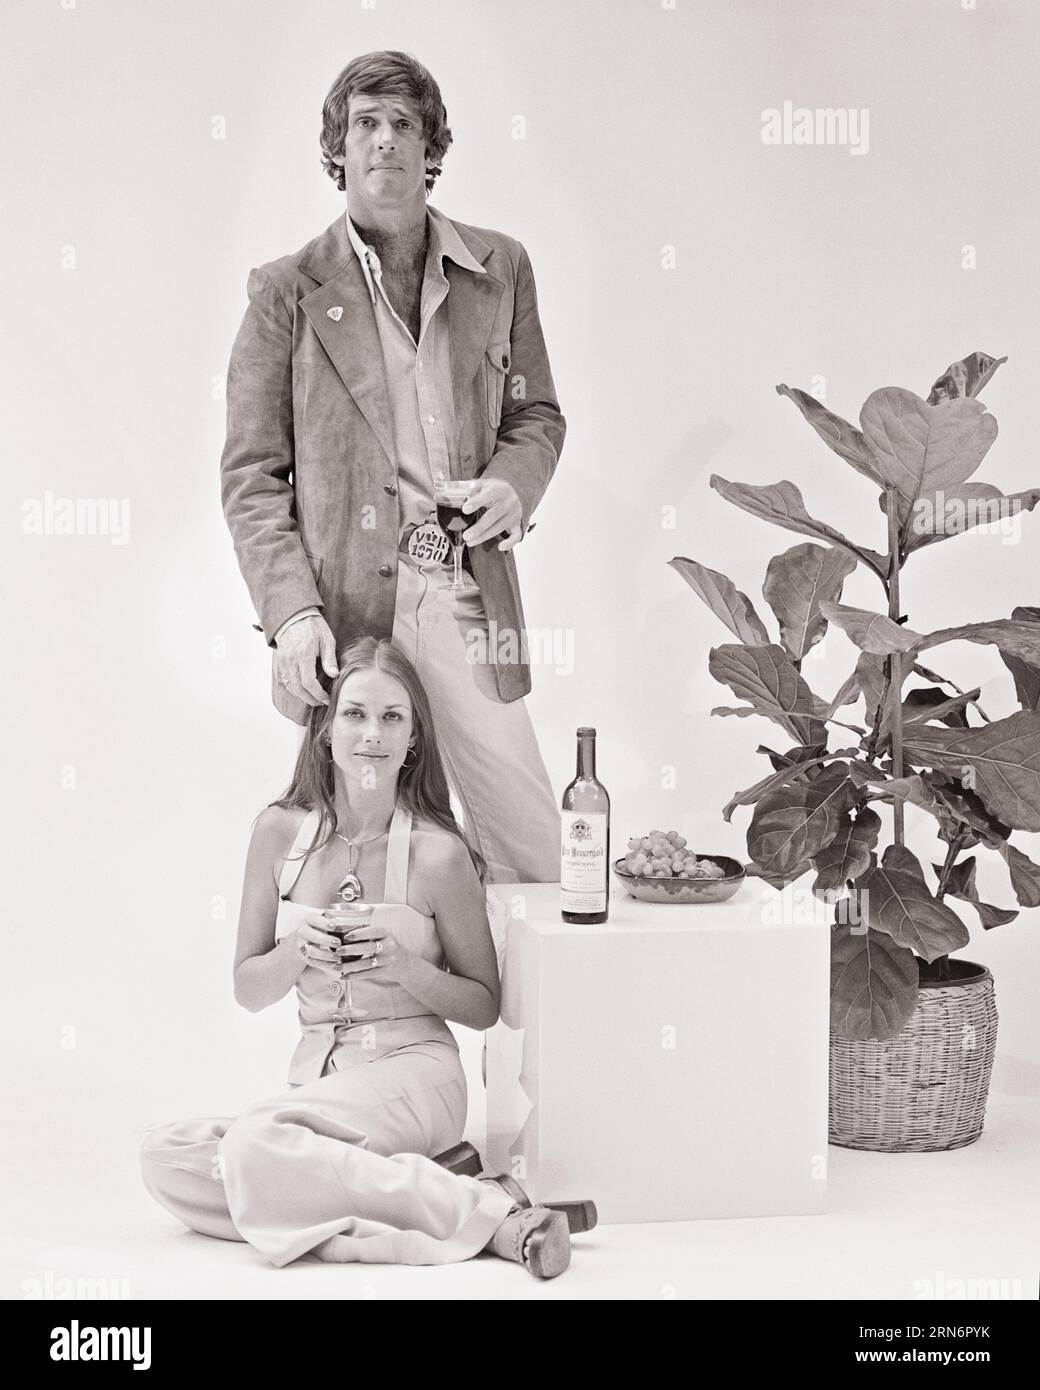 1970s FASHIONABLE COUPLE MAN STANDING WOMAN SITTING CUBE TABLE WITH WINE BOTTLE BOTH HOLDING GLASSES OF WINE LOOKING AT CAMERA - f13393 HAR001 HARS EYE CONTACT CUBE BEVERAGE STYLES JUMPSUIT FLUID HAIRSTYLE GRAPES HOUSE PLANT LIQUOR STYLISH SPIRITS BOOZE FASHIONS MID-ADULT MID-ADULT MAN MID-ADULT WOMAN SUEDE BEVERAGES BLACK AND WHITE CAUCASIAN ETHNICITY HAR001 OLD FASHIONED Stock Photo